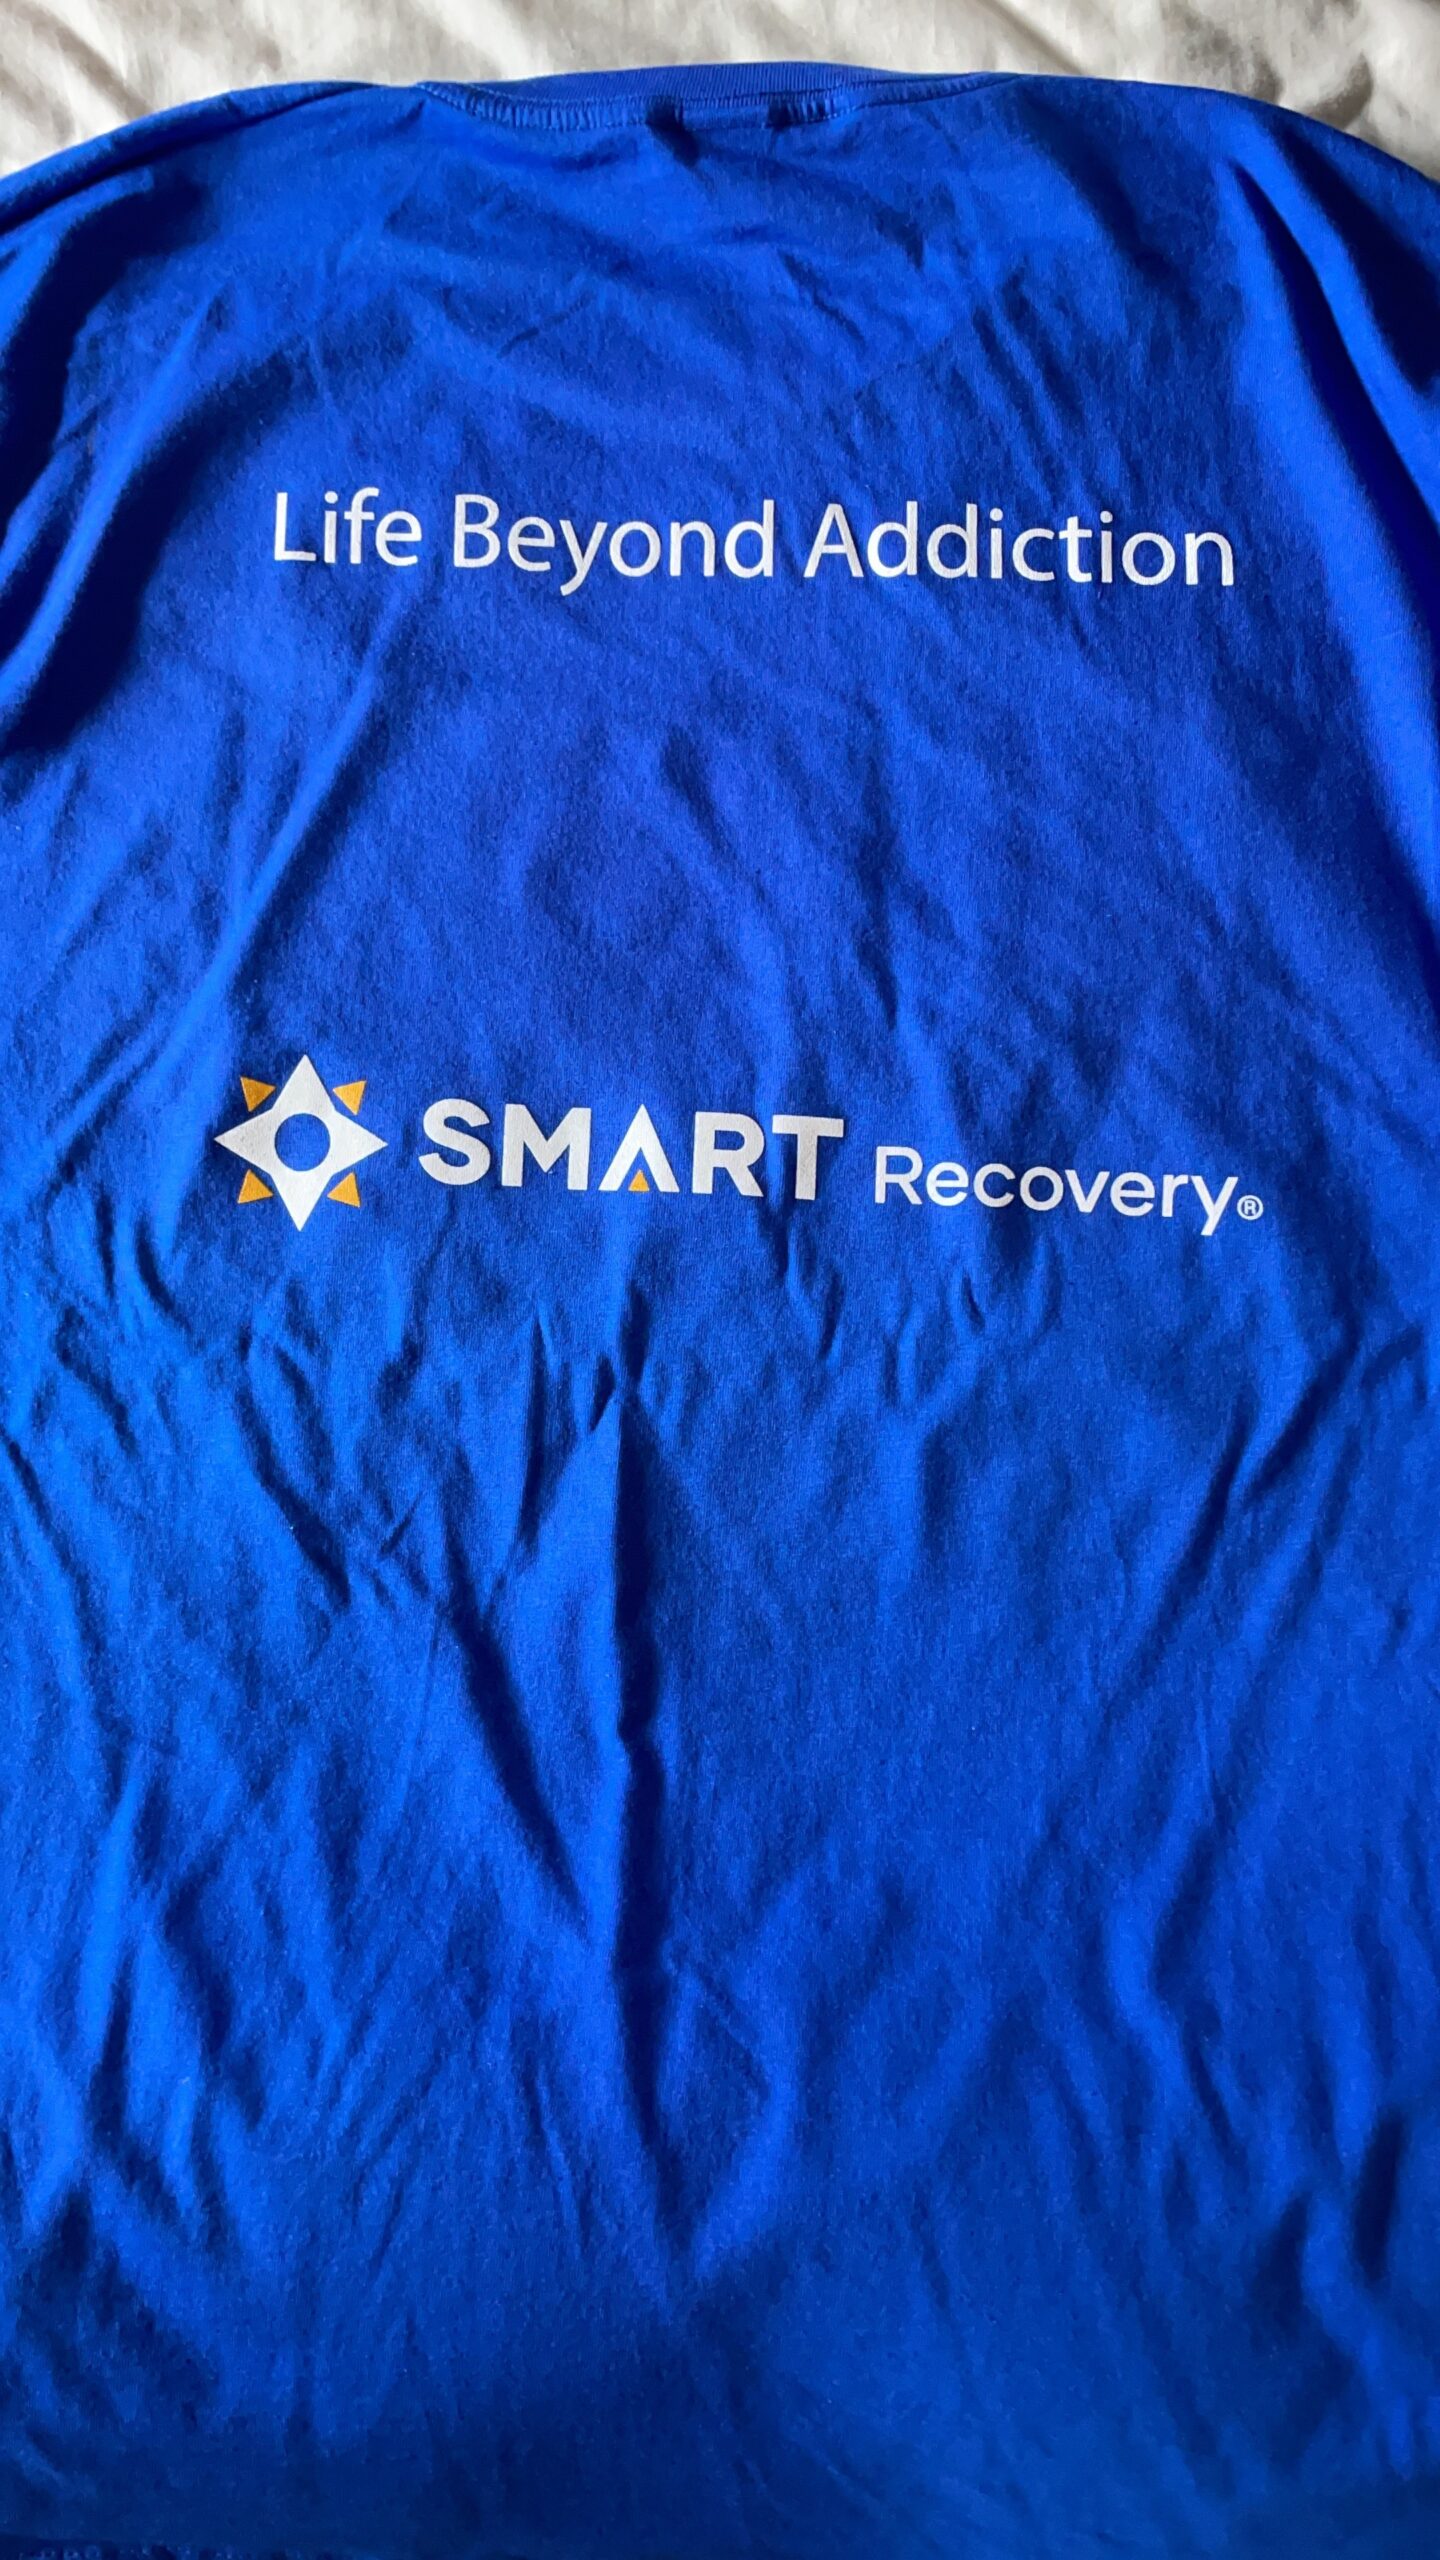 https://smartrecovery.org.uk/wp-content/uploads/2021/09/T-Shirt-Back-scaled.jpg